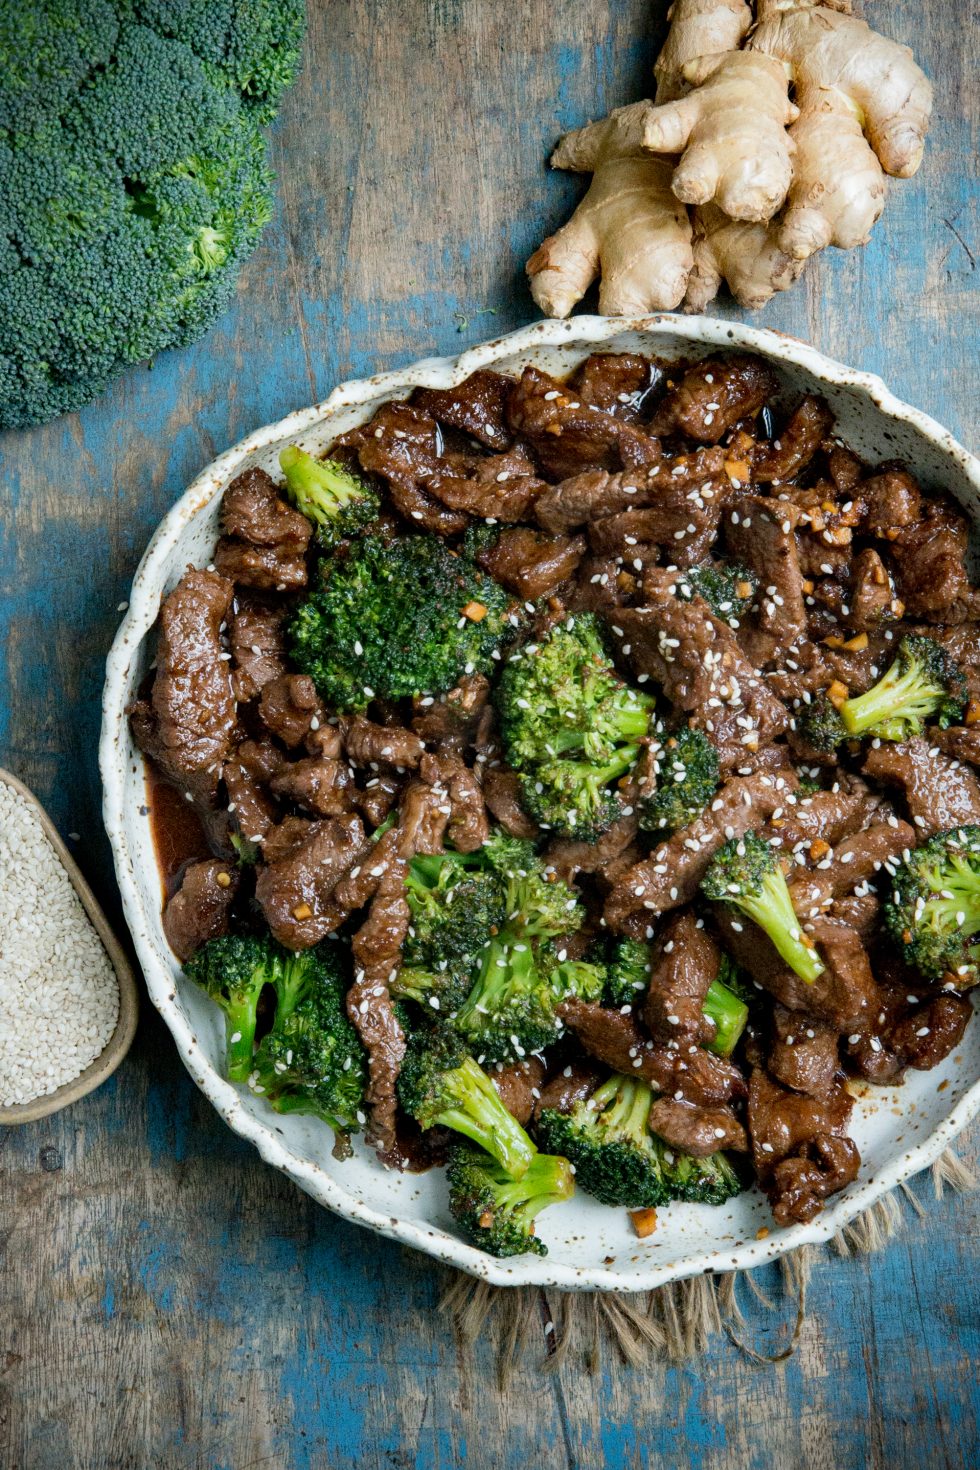 Low-Carb Beef and Broccoli (Keto-Friendly) - Simply So Healthy